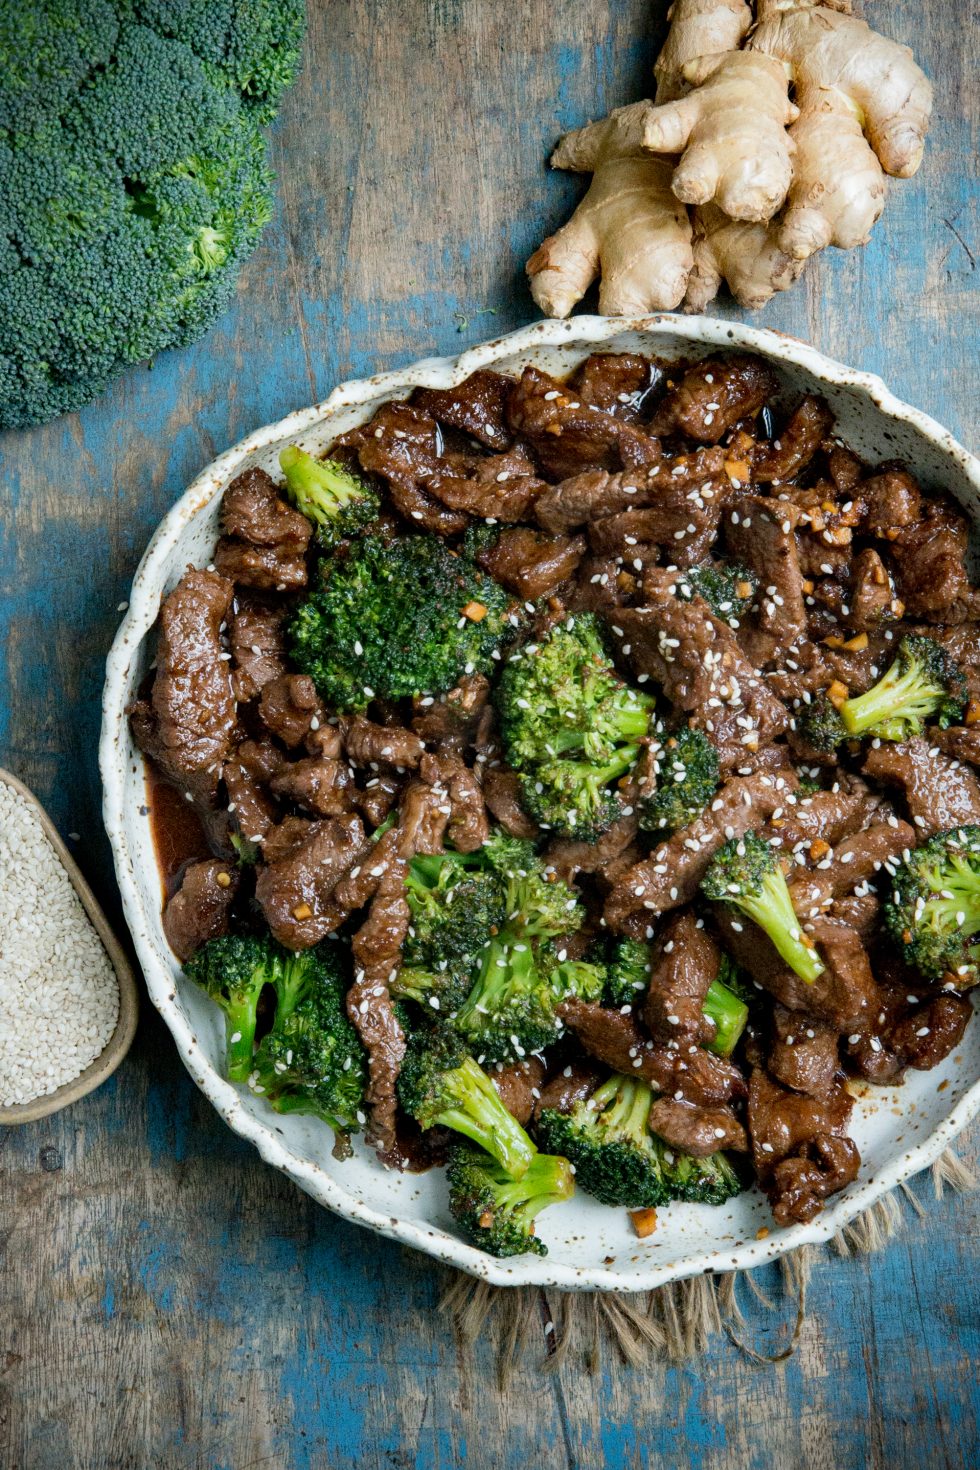 Low-Carb Beef and Broccoli (Keto-Friendly) - Simply So Healthy